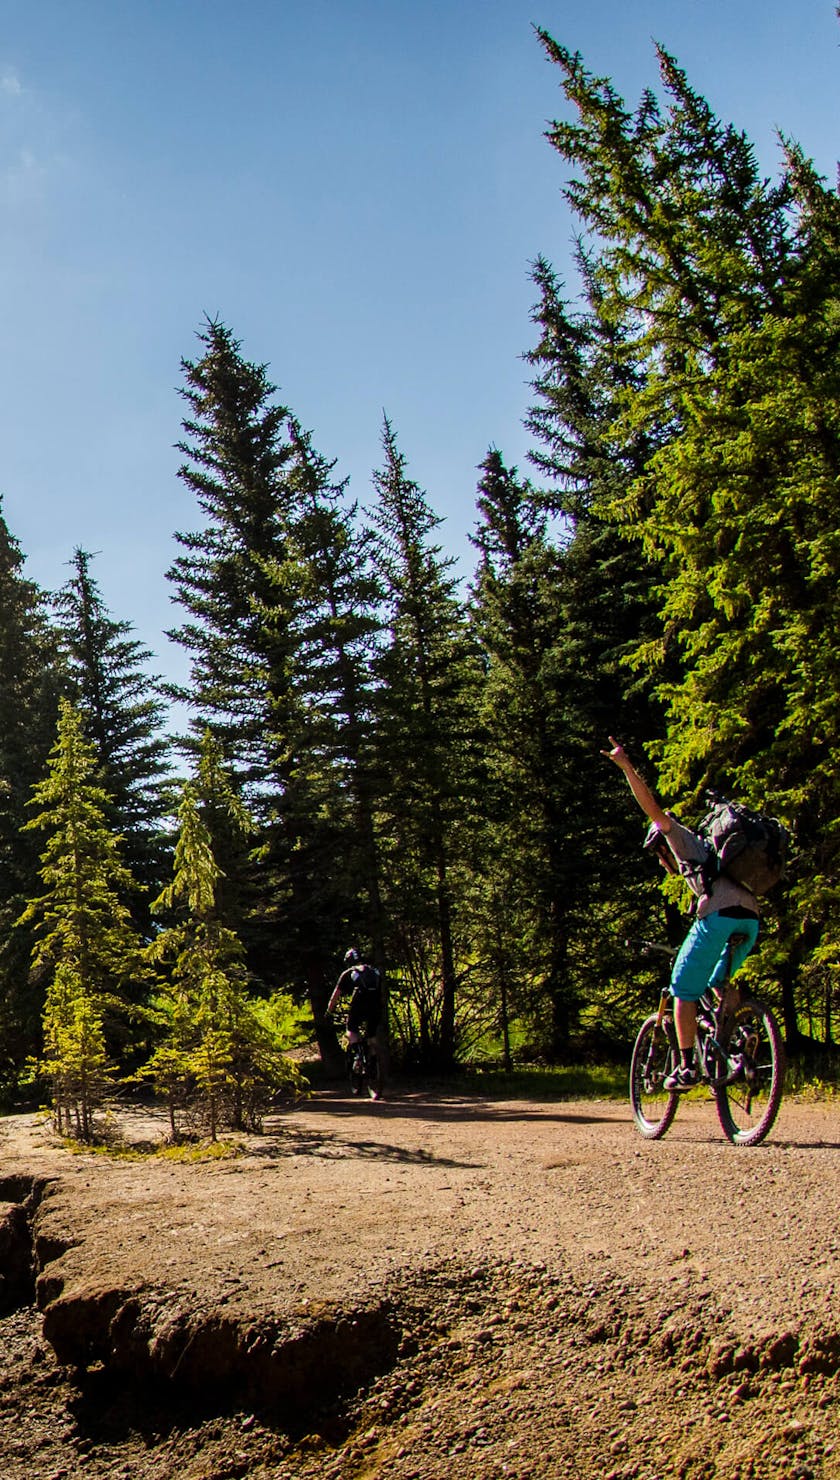 A stoked rider giving the horns on creekside single track